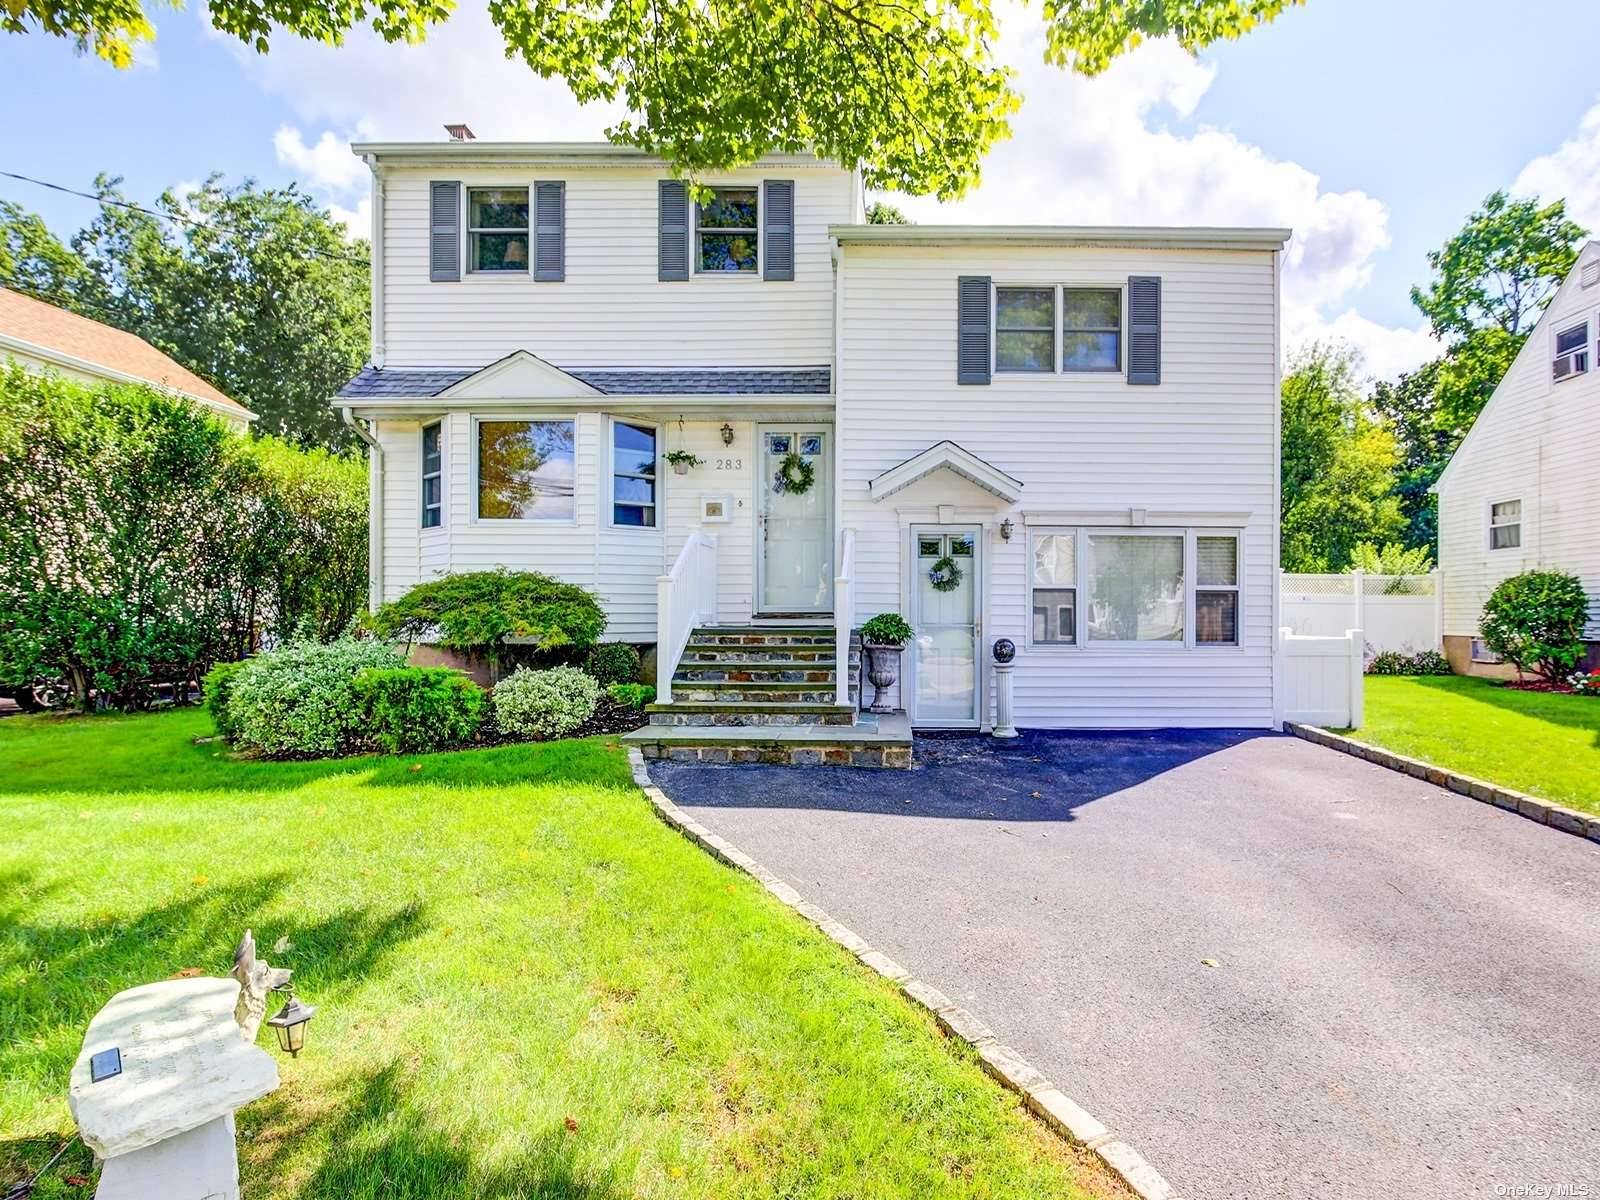 Welcome to this beautifully maintained home in Massapequa School District 23.